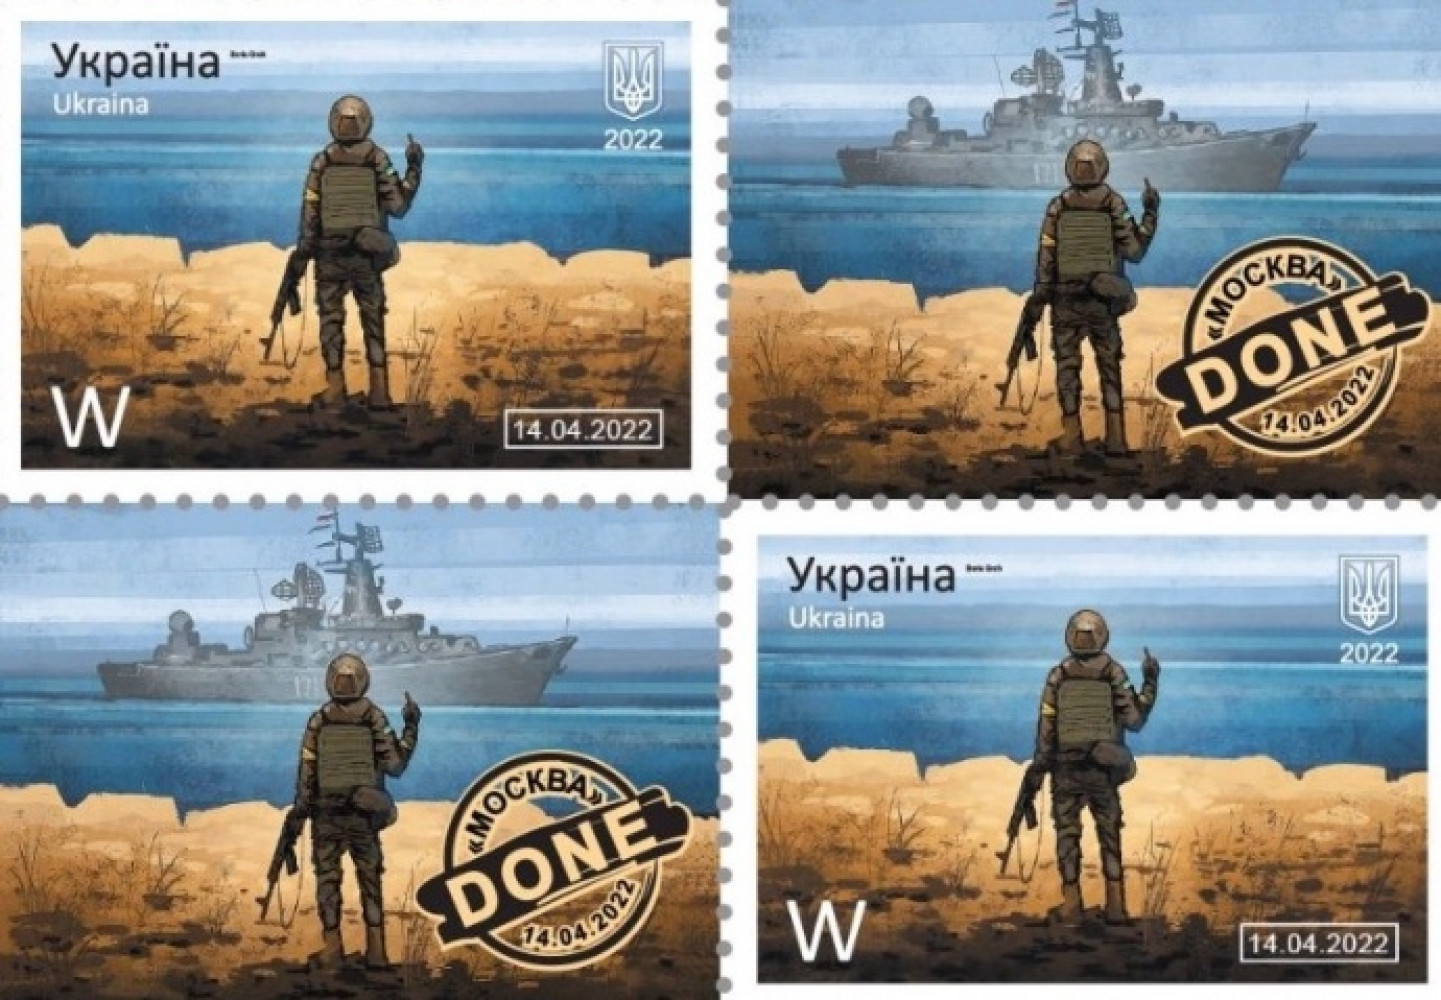 Ukrposhta will sell on eBay 100 thousand stamps "Russian military ship ... EVERYTHING!": how much do they cost